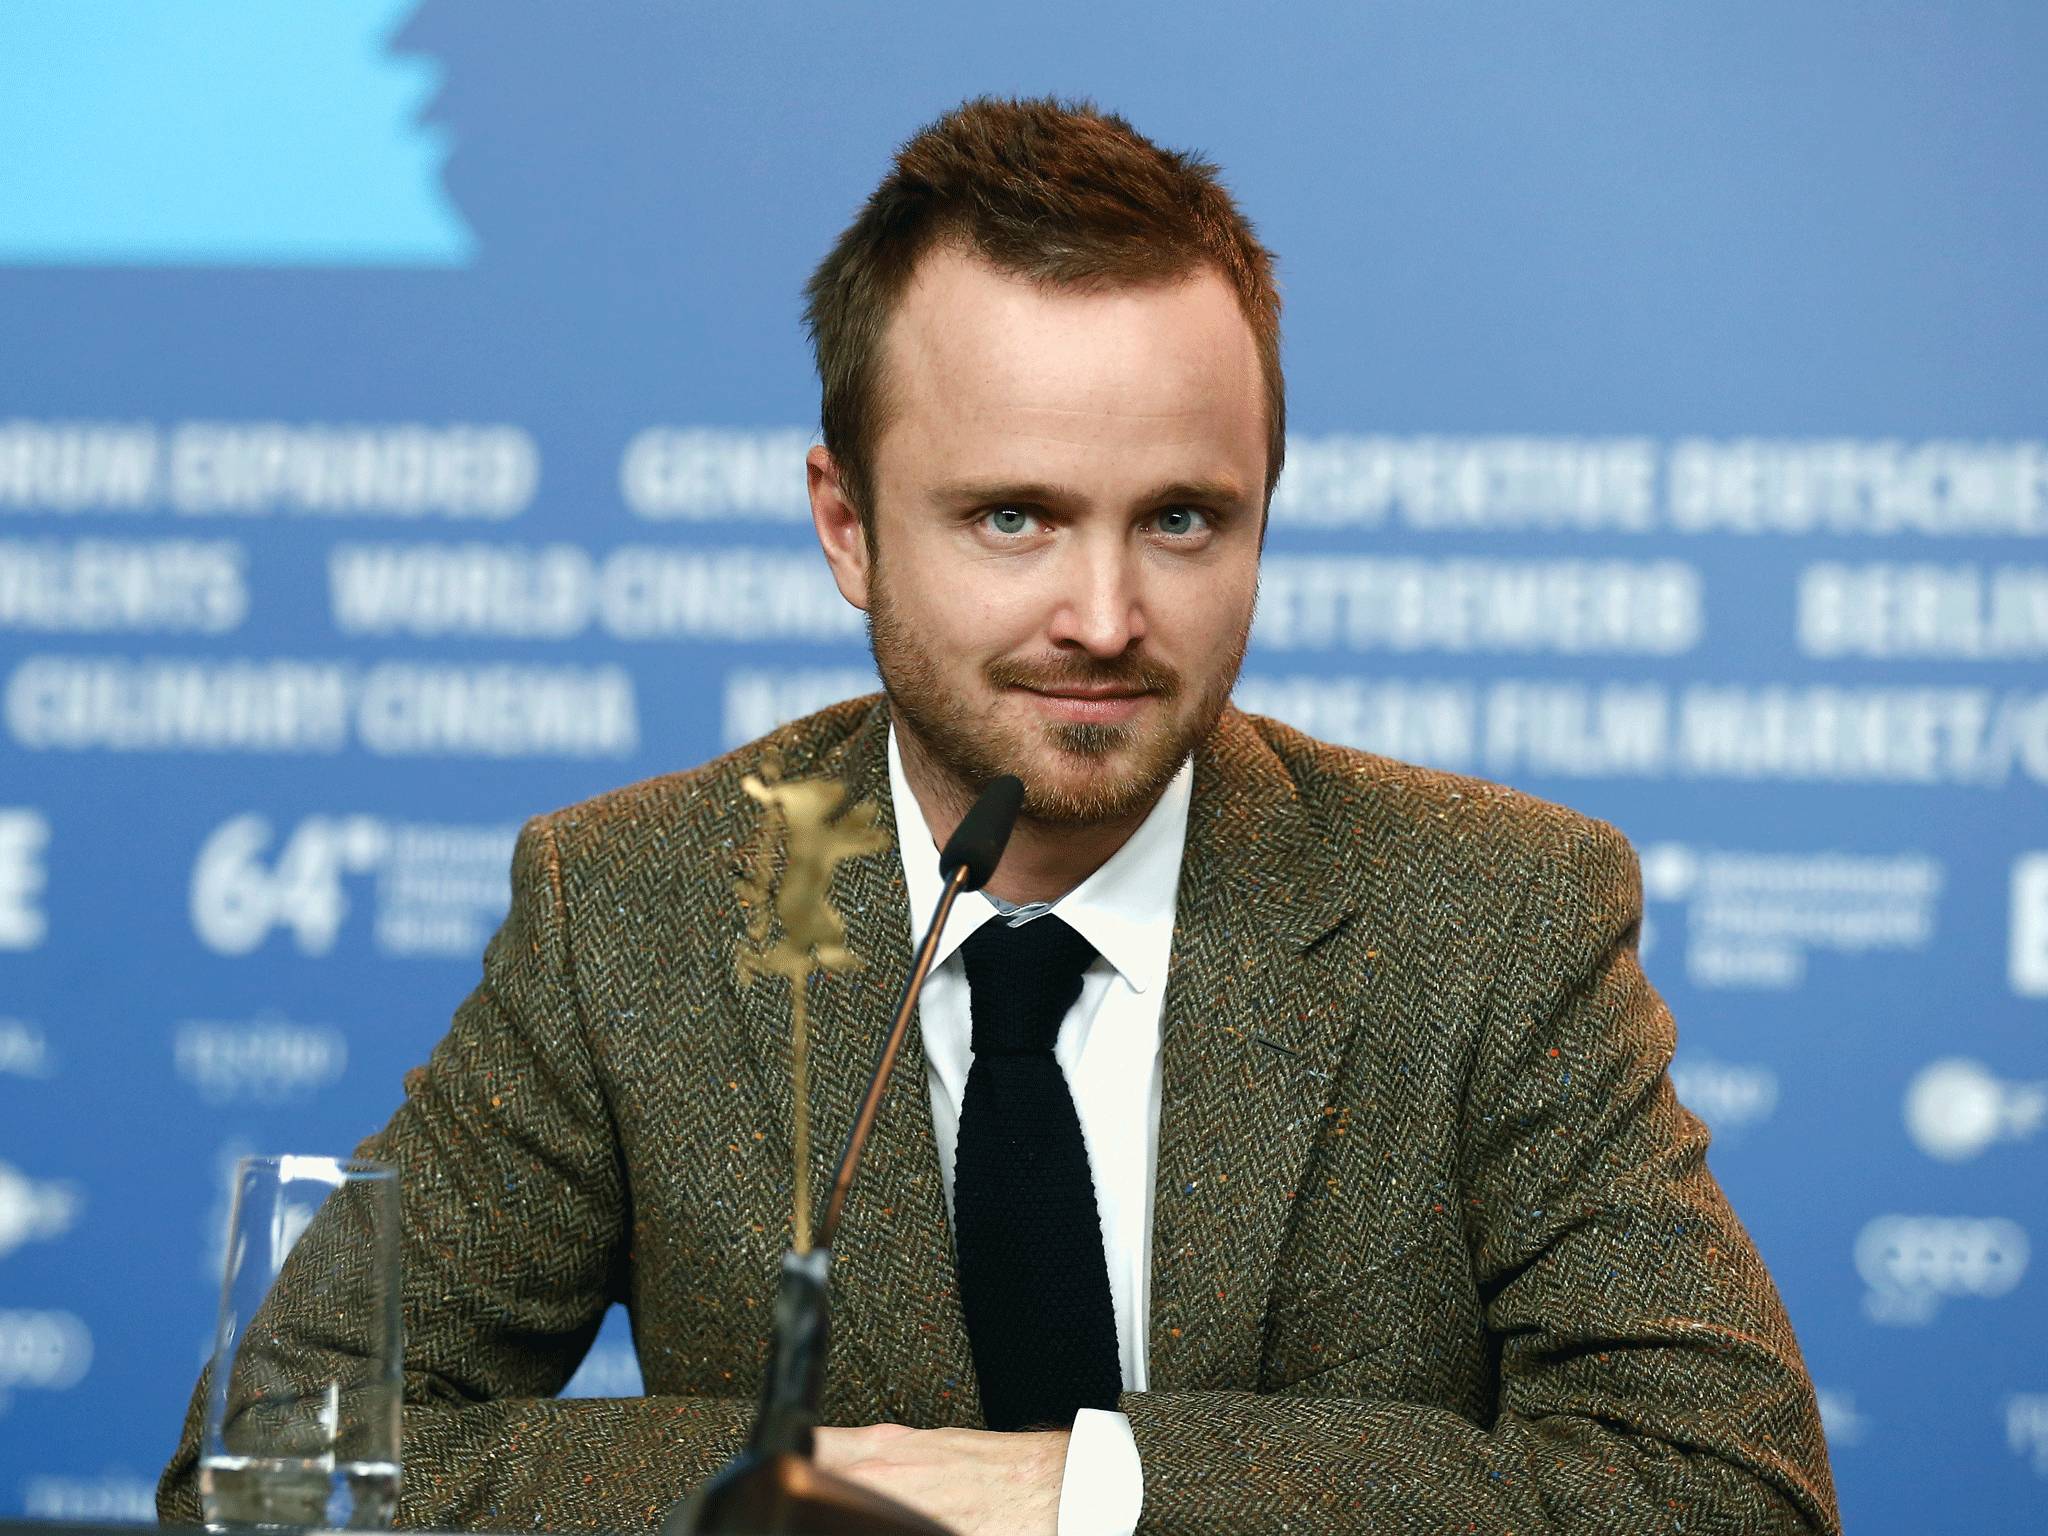 Aaron Paul may have to summon an elbow drop during the WWE appearance